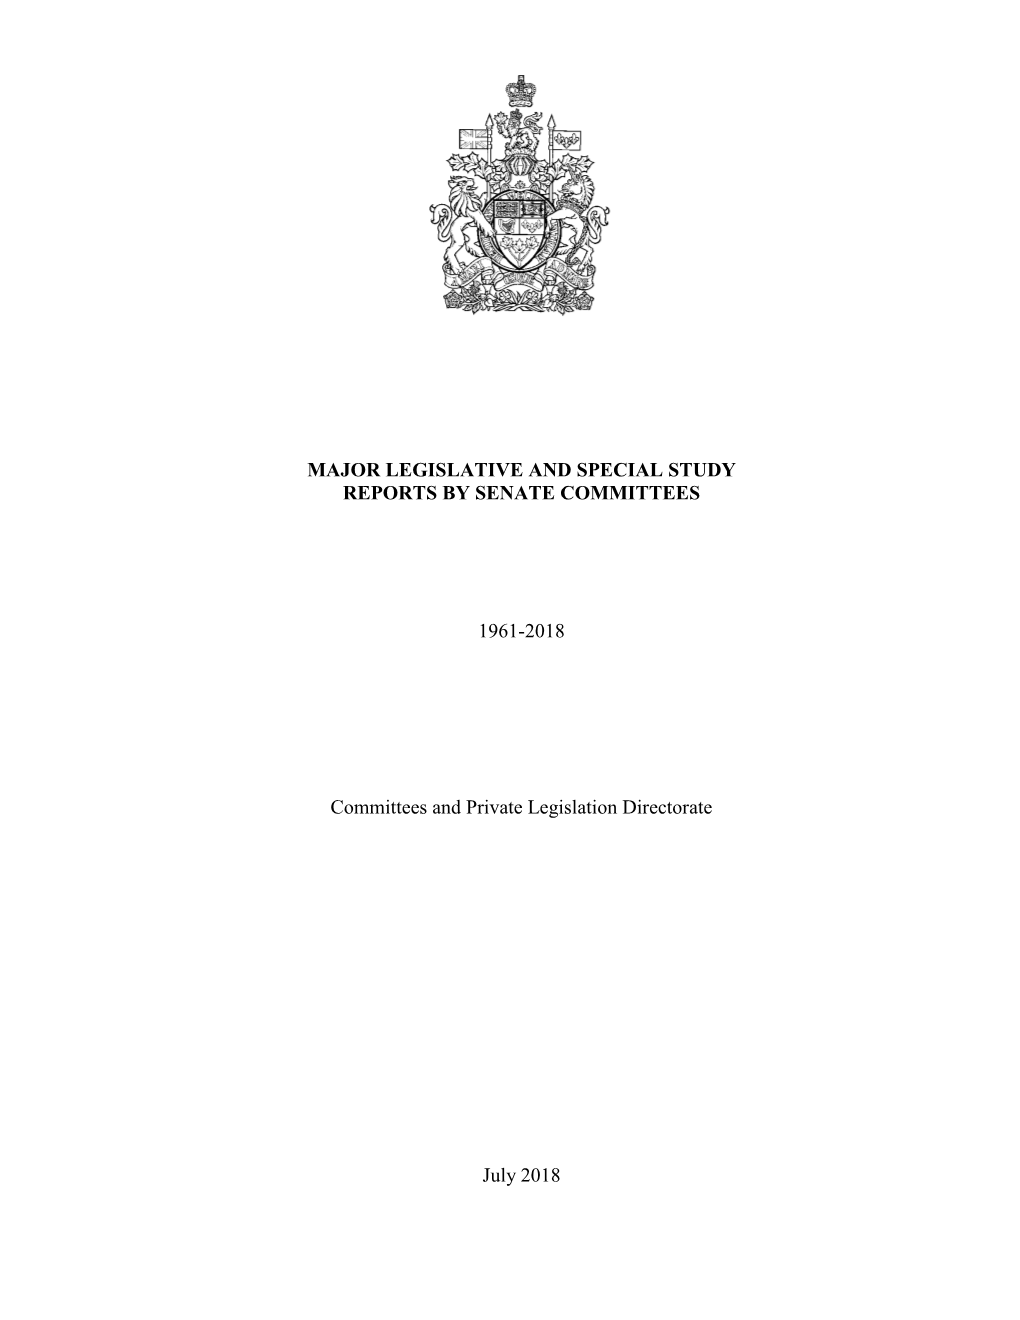 Major Legislative and Special Study Reports by Senate Committees